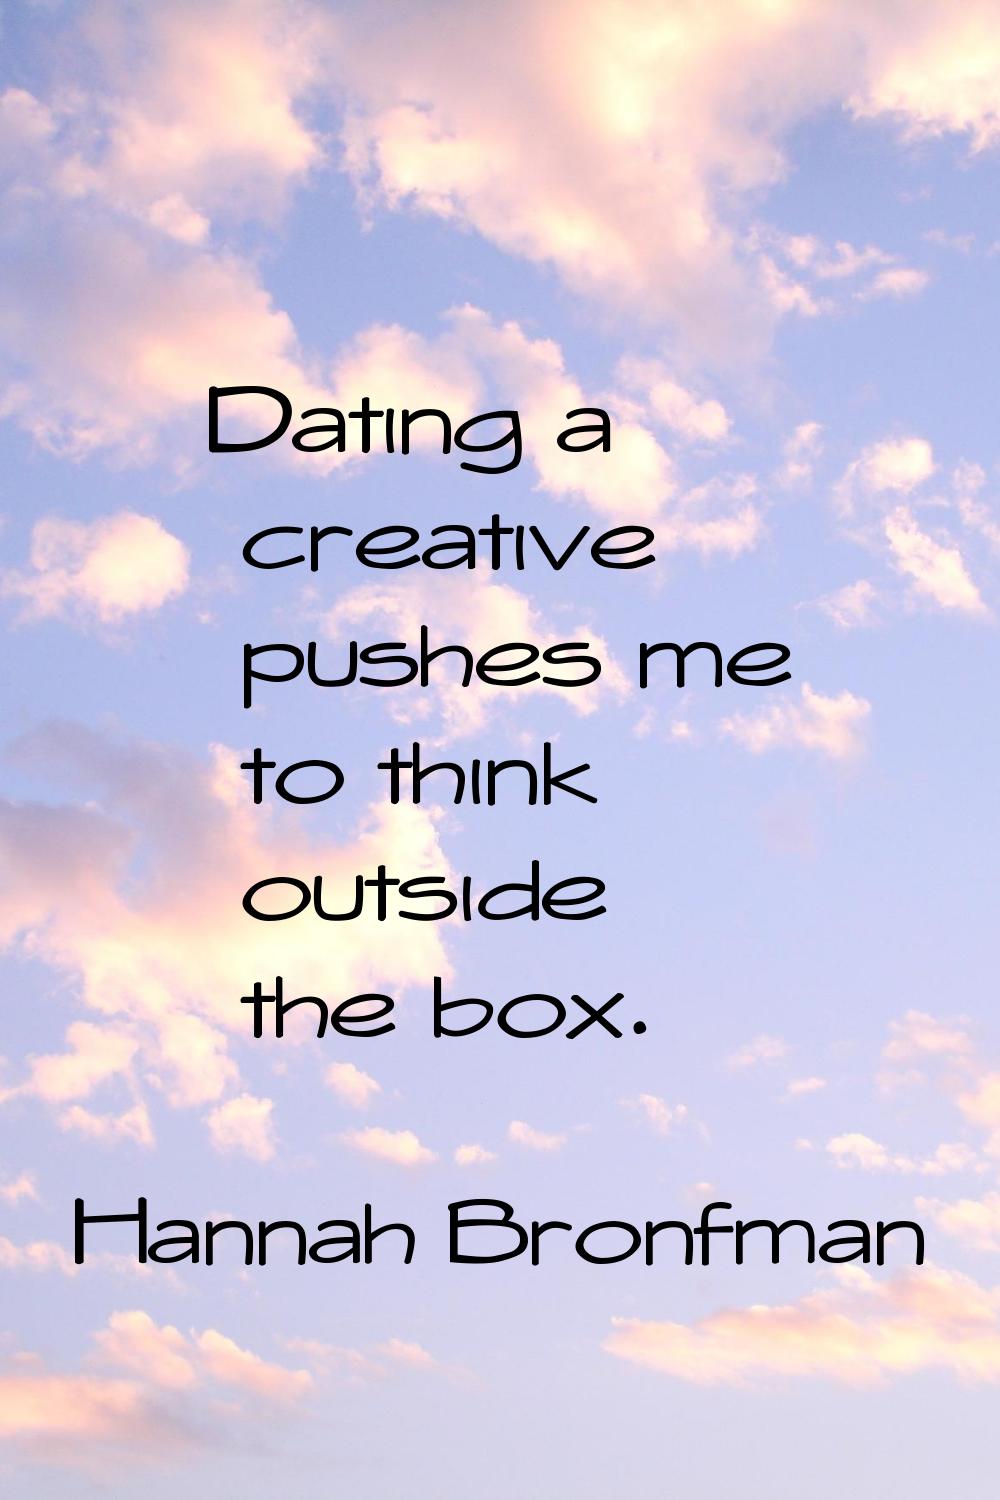 Dating a creative pushes me to think outside the box.